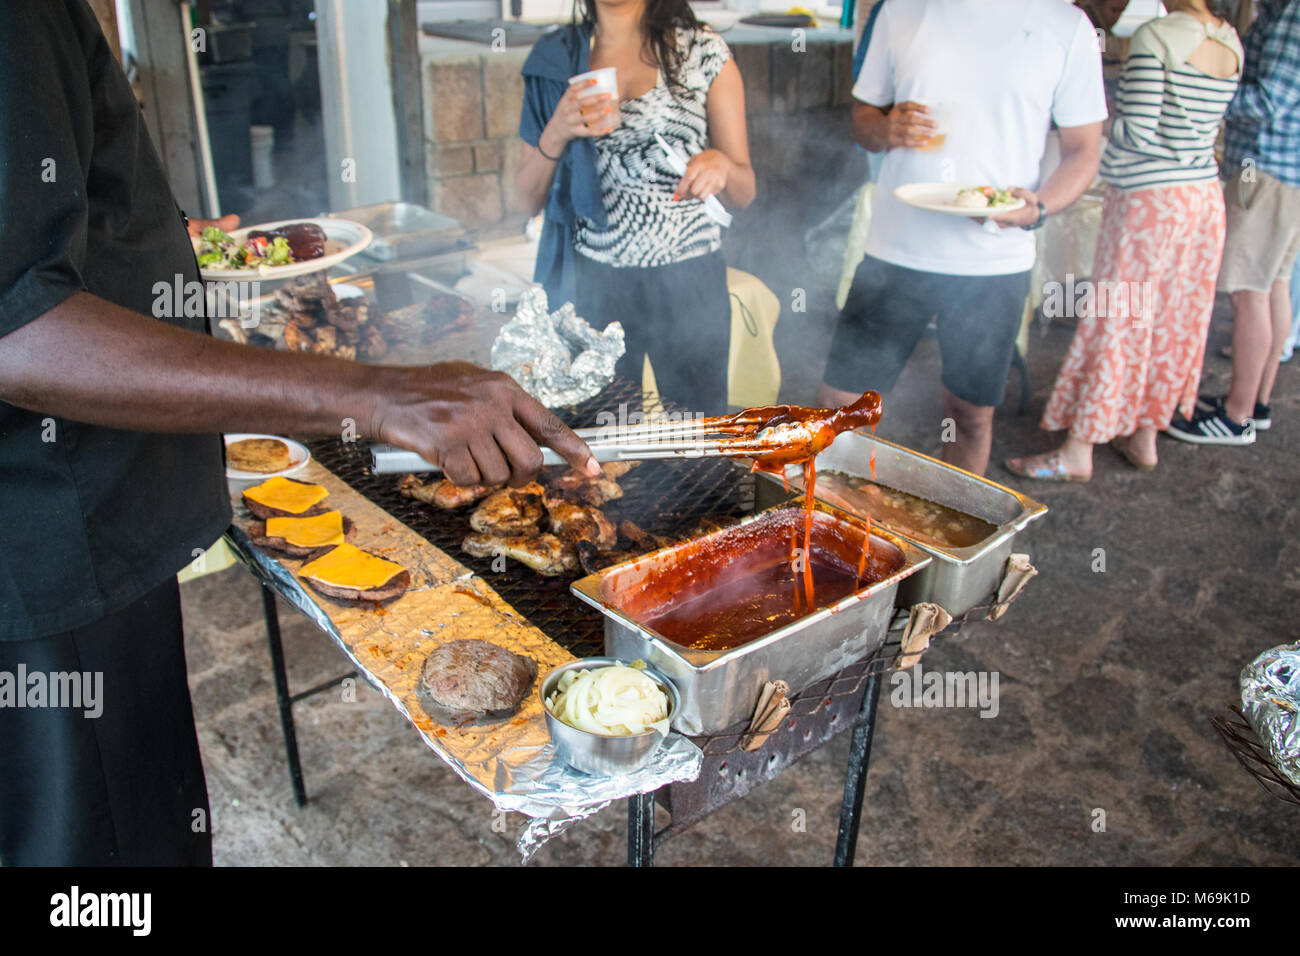 Shirley Heights dimanche barbecue, Antigua Banque D'Images